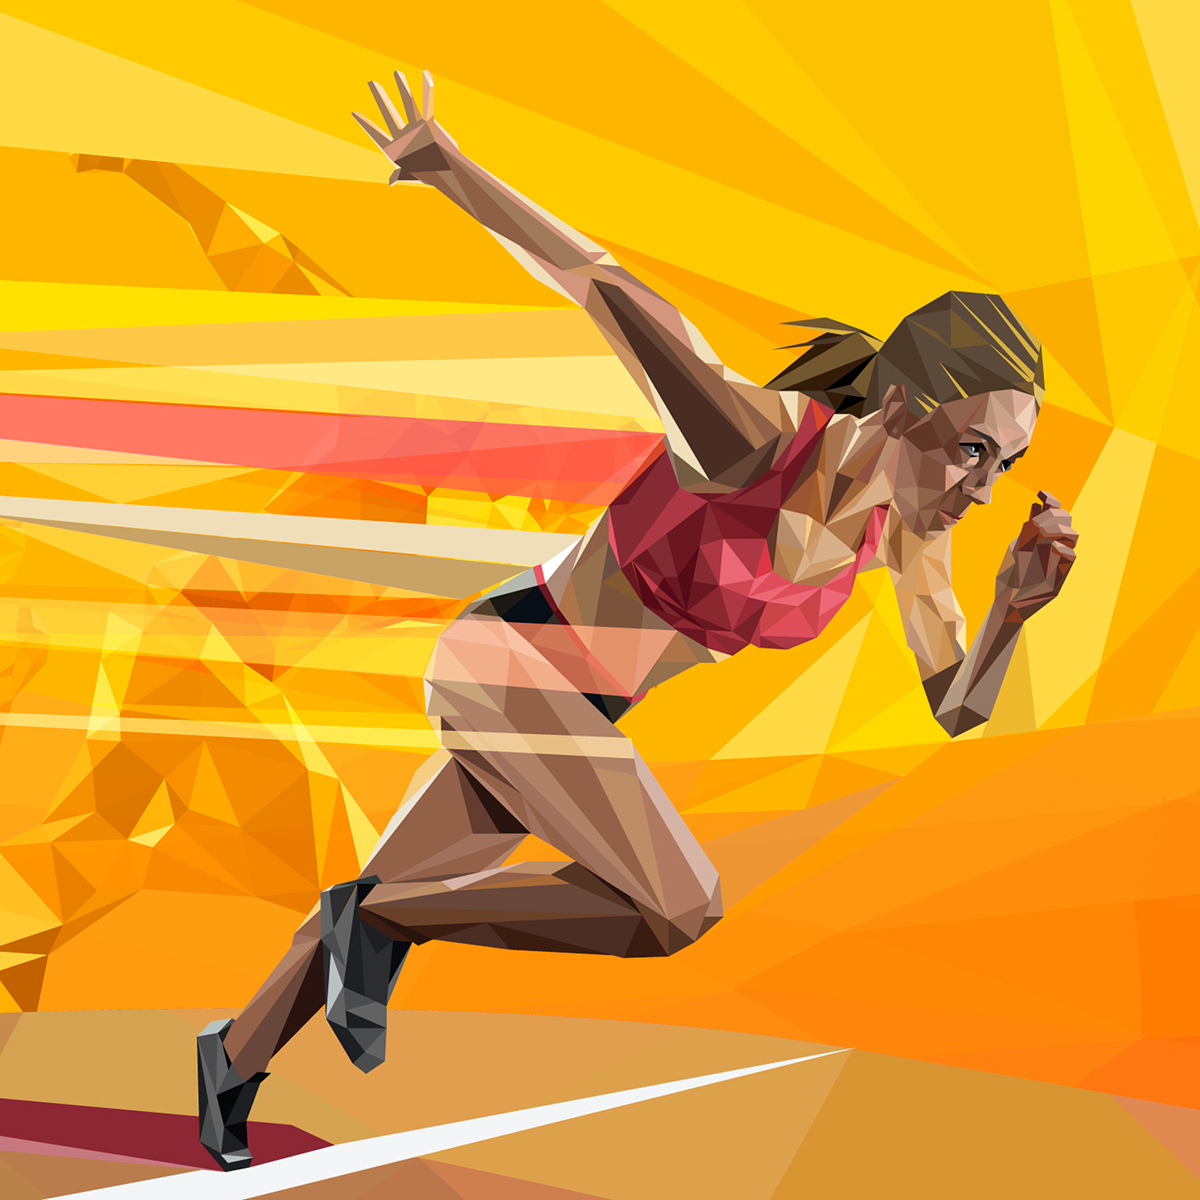 runner sport triangulate Low Poly vector graphicks Picture calendar